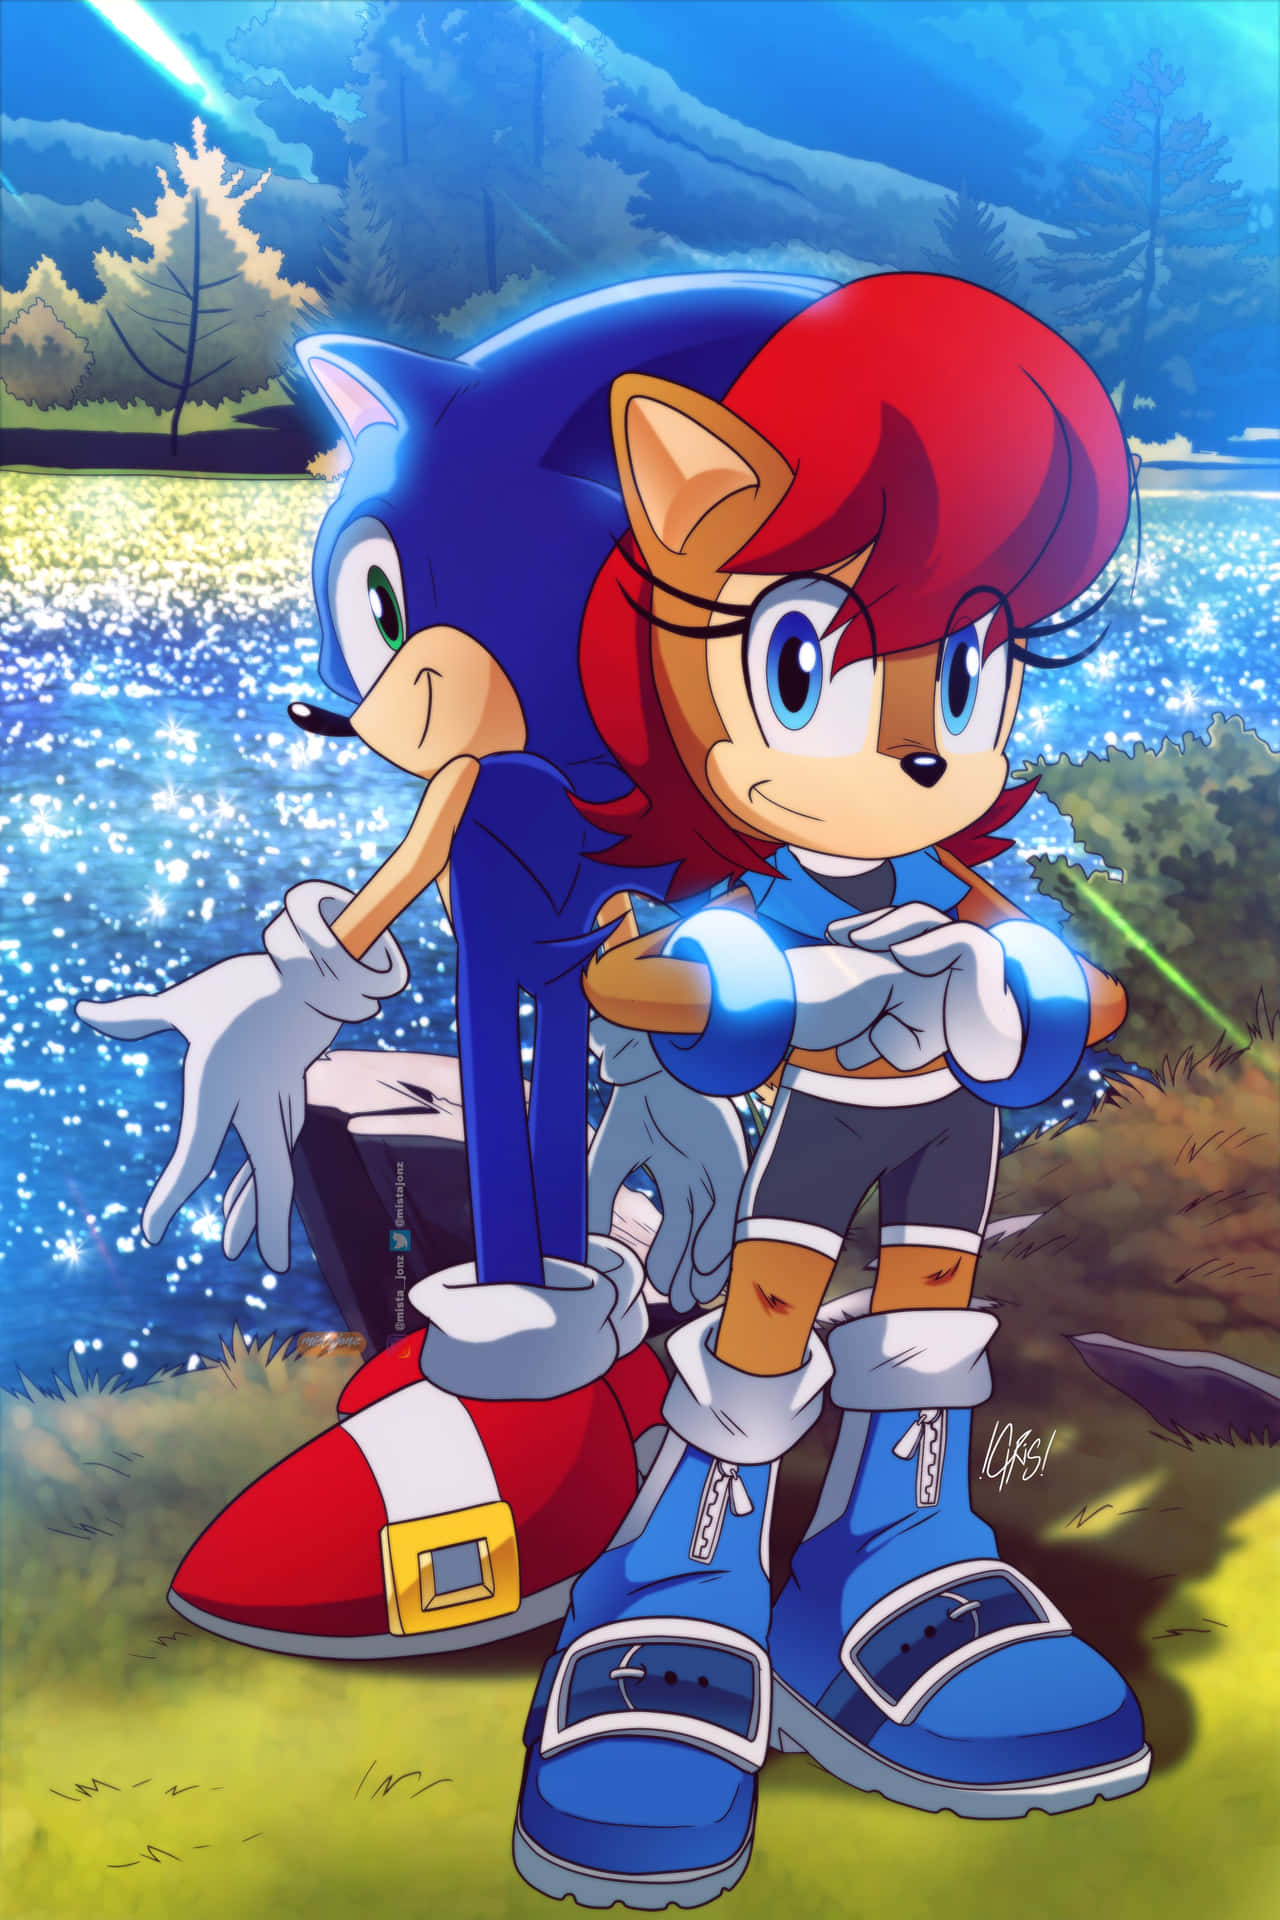 Sonic the Hedgehog and Sally Acorn together in action Wallpaper